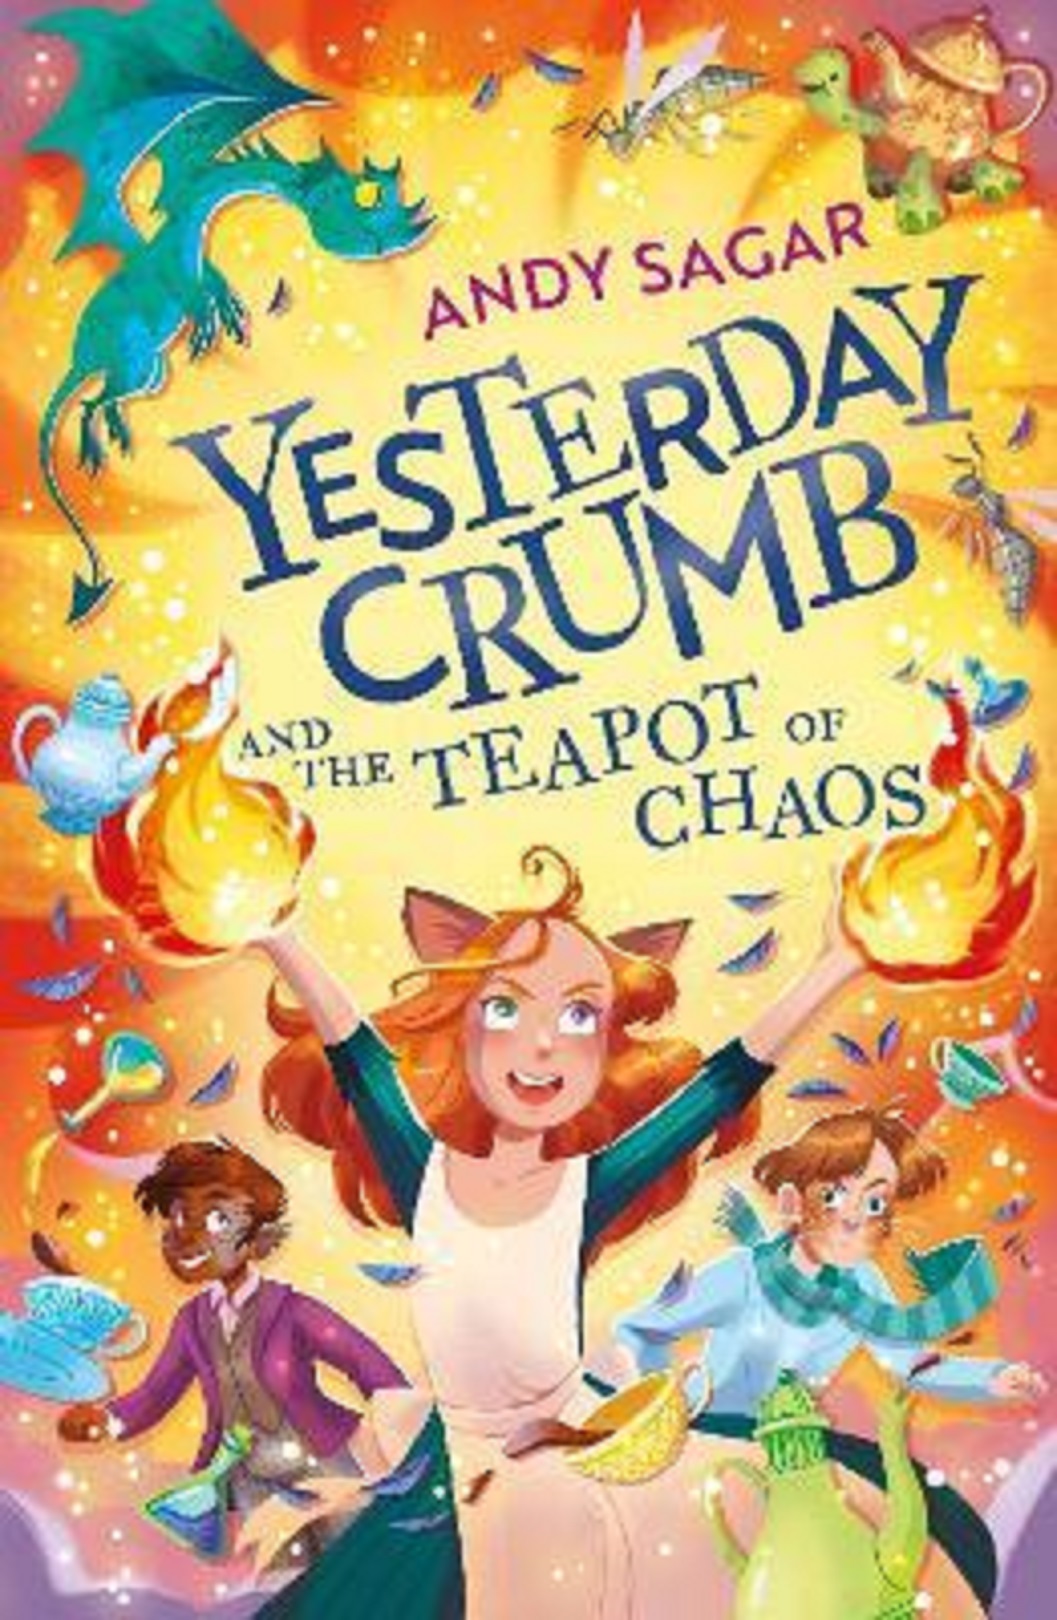 Yesterday Crumb and the Teapot of Chaos - Volume 2 | Andy Sagar